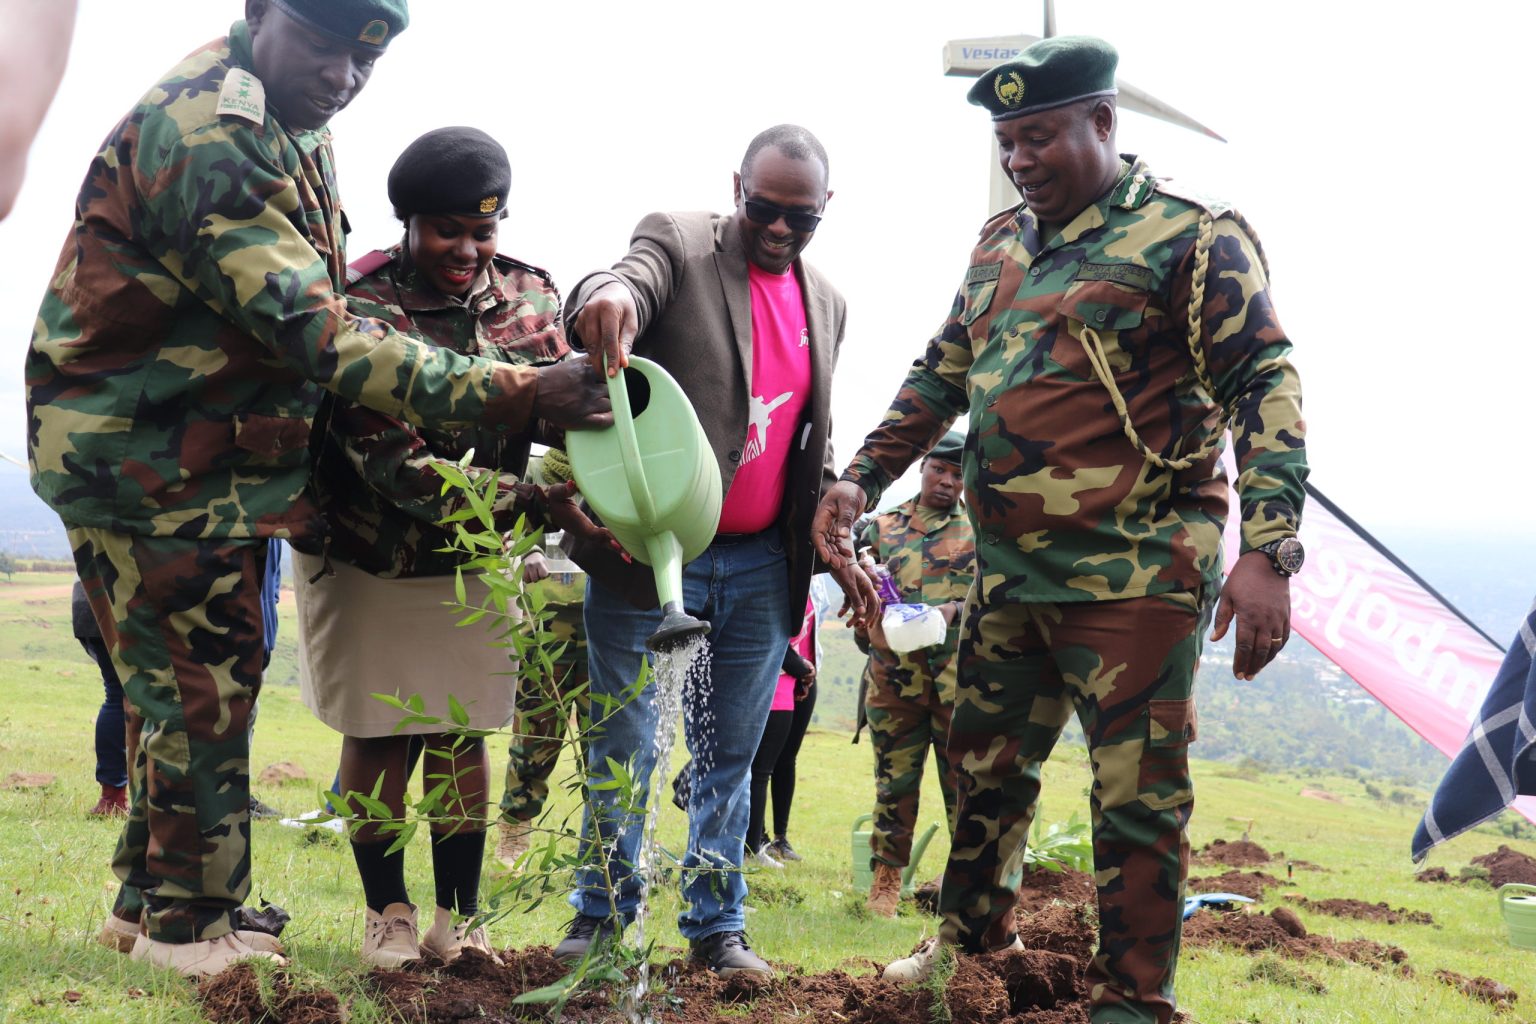 (L-R) Francis Kurema Kariuki Forest Station Manager Ngong Hills Kenya Forest Service, Bathsheba Nyaboke Osiemo Assistant County Commissioner 1 Kajiado North Sub County, Jambojet CEO Karanja Ndegwa and Francis Kariuki Head Of Nairobi Forest Conservancy KFS at the ‘Adopt-A-Forest’ ground breaking at Ngong Hills. www.theexchange.africa